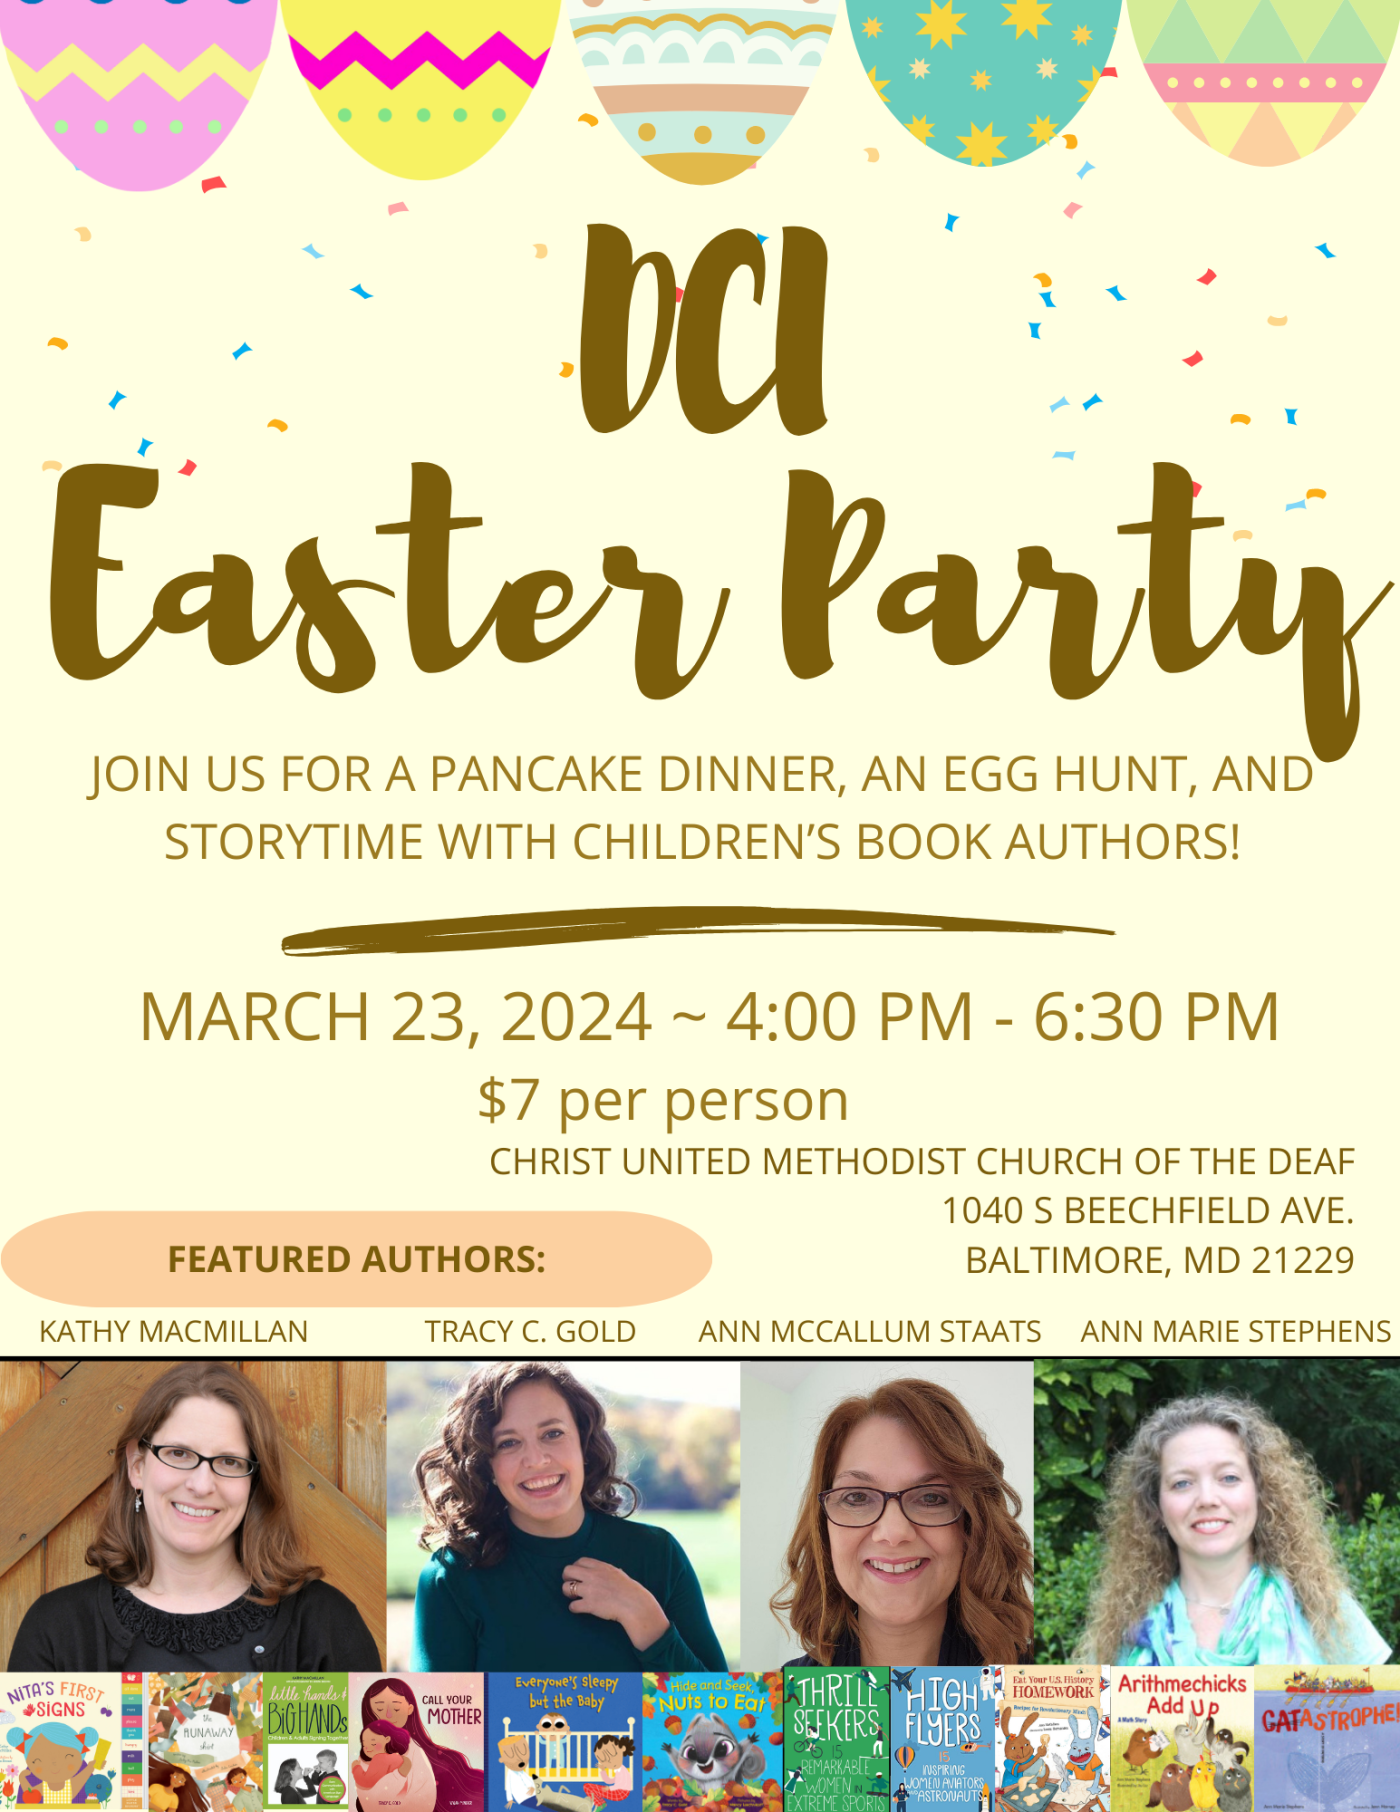 DCI Easter Party. Join us for a pancake supper, egg hunt, and storytime with children's book authors. March 24, 2024, 4-6:30 PM. $7 per person. Christ United Methodist Church of the Deaf. 1040 S Beechfield Ave, Catonsville MD 21229. Featured authors: Kathy MacMillan, Tracy C. Gold, Ann McCallum Staats, Ann Marie Stephens.